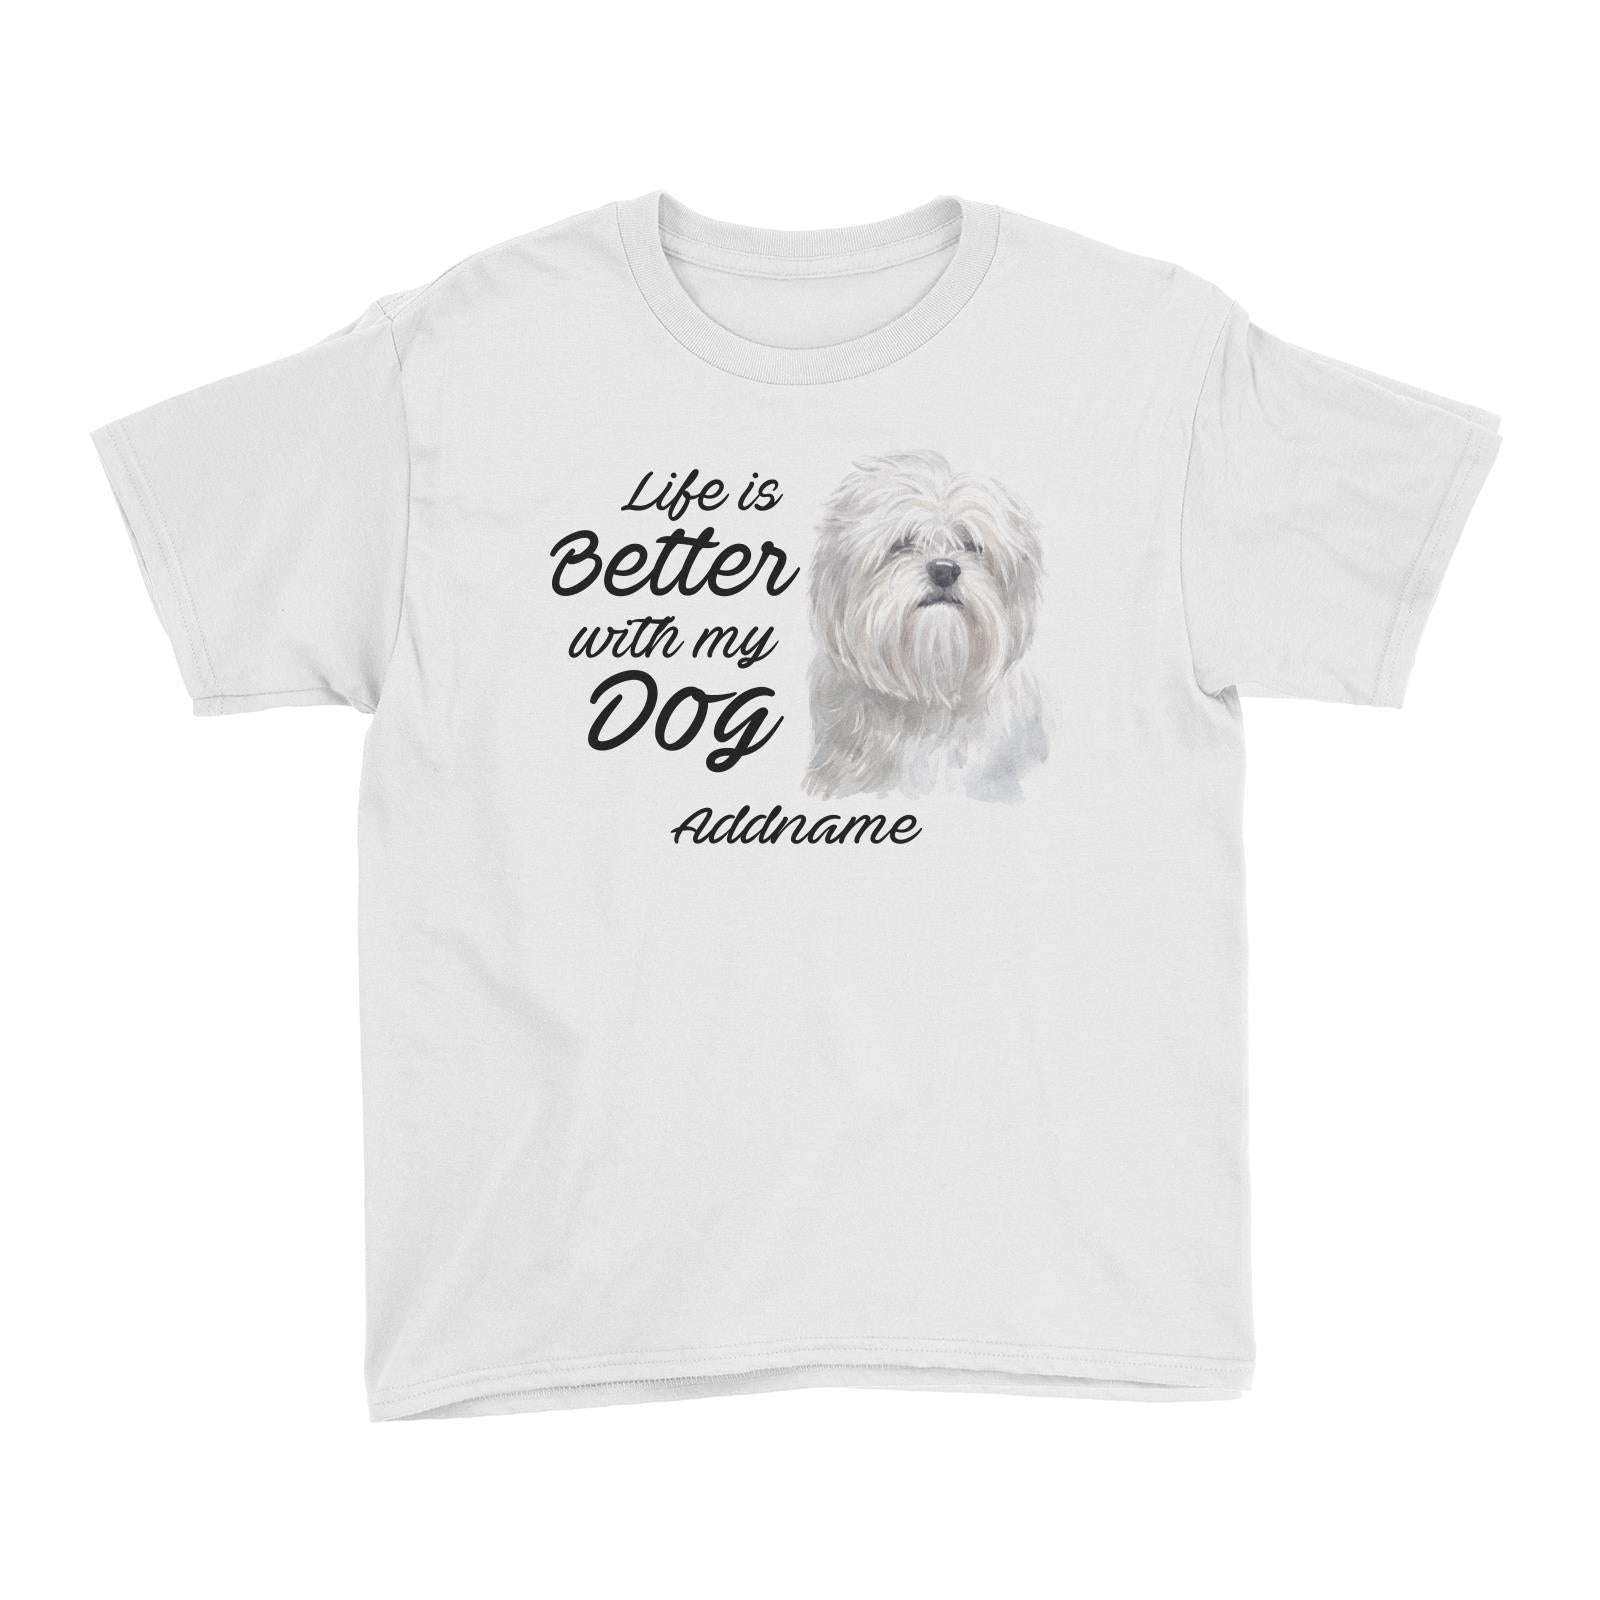 Watercolor Life is Better With My Dog Lhasa Apso Addname Kid's T-Shirt